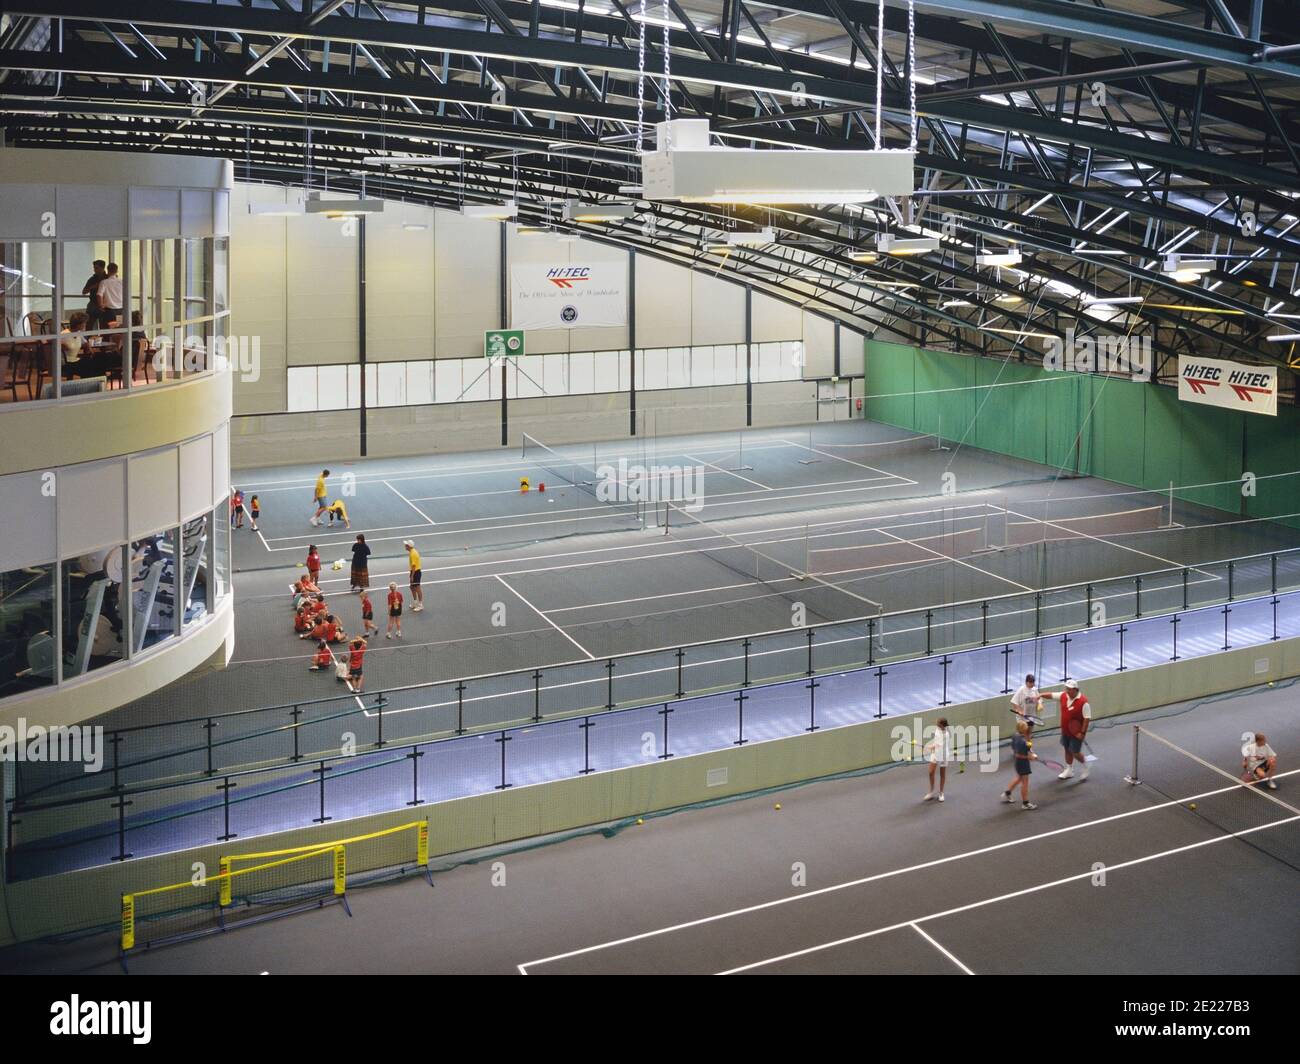 Interior view of the Southend Leisure & Tennis Centre, also referred to as Garon Park.  A sports centre located in Southend-on-Sea, Essex, England. UK Stock Photo